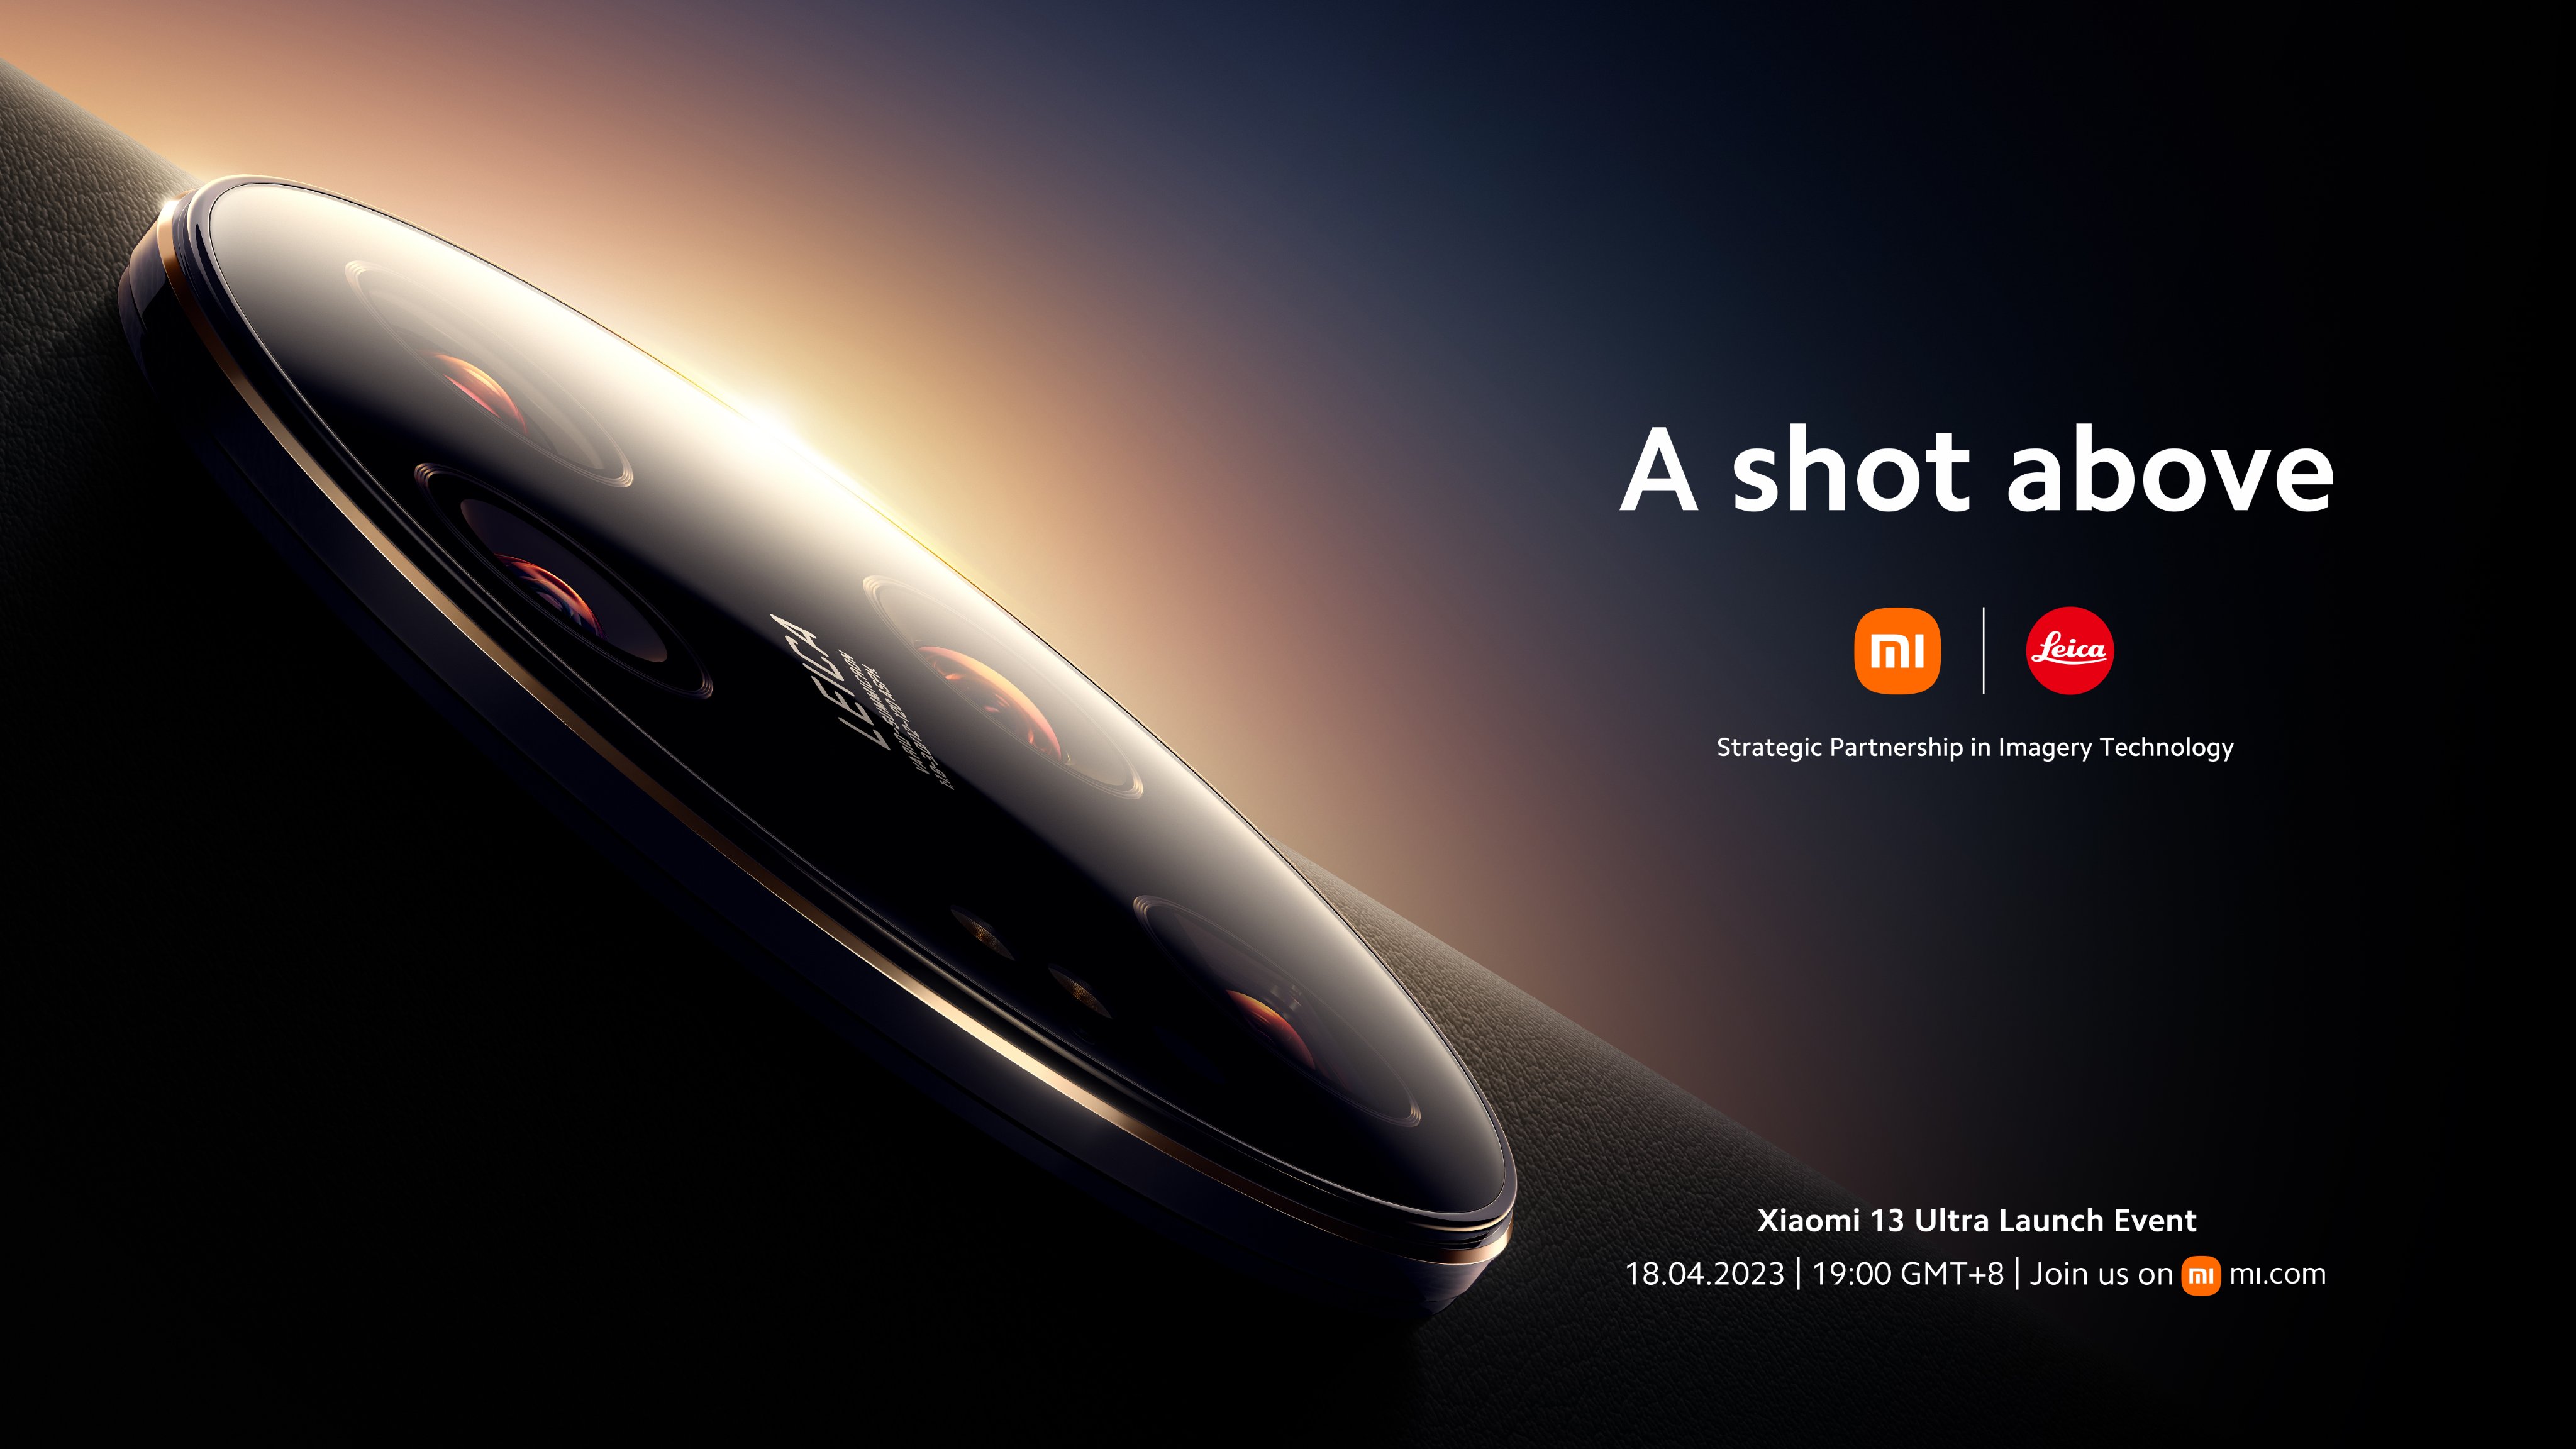 It's official: Xiaomi 13 Ultra flagship with Leica camera to be unveiled on 18 April